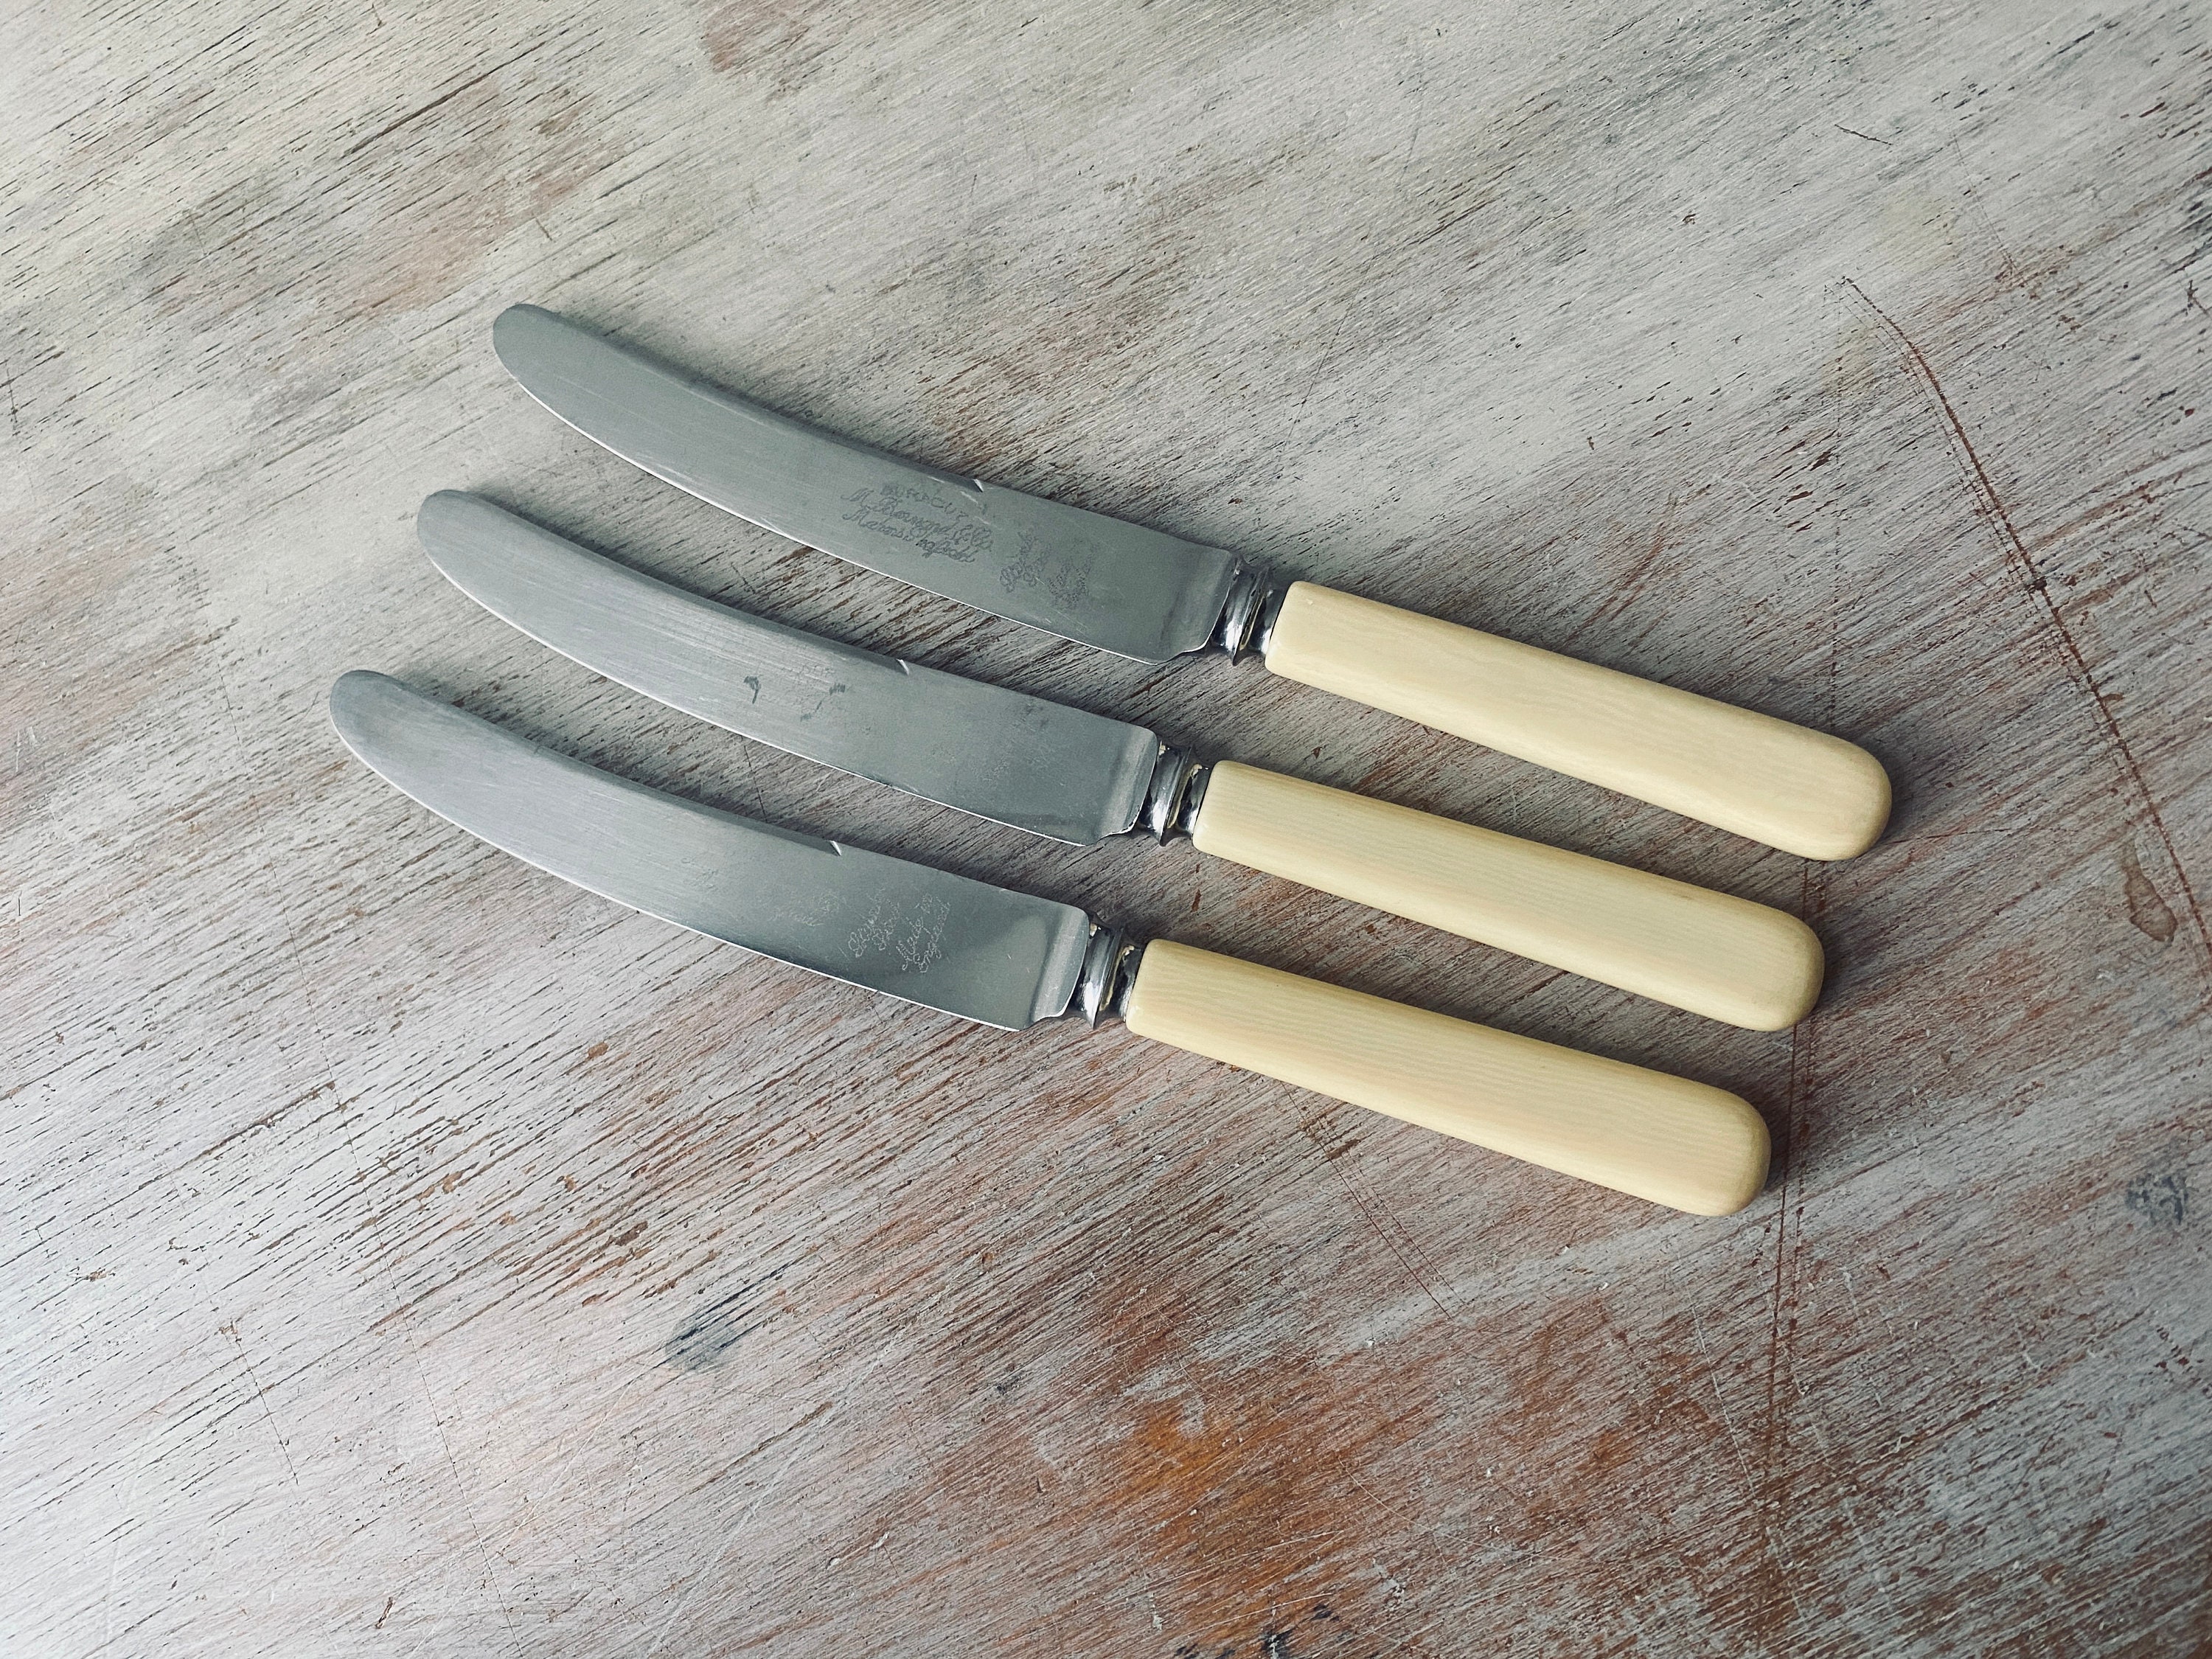 Set Of 3 EPNS Fish Knives & Forks With Faux Bone Handles plus Butter Knife